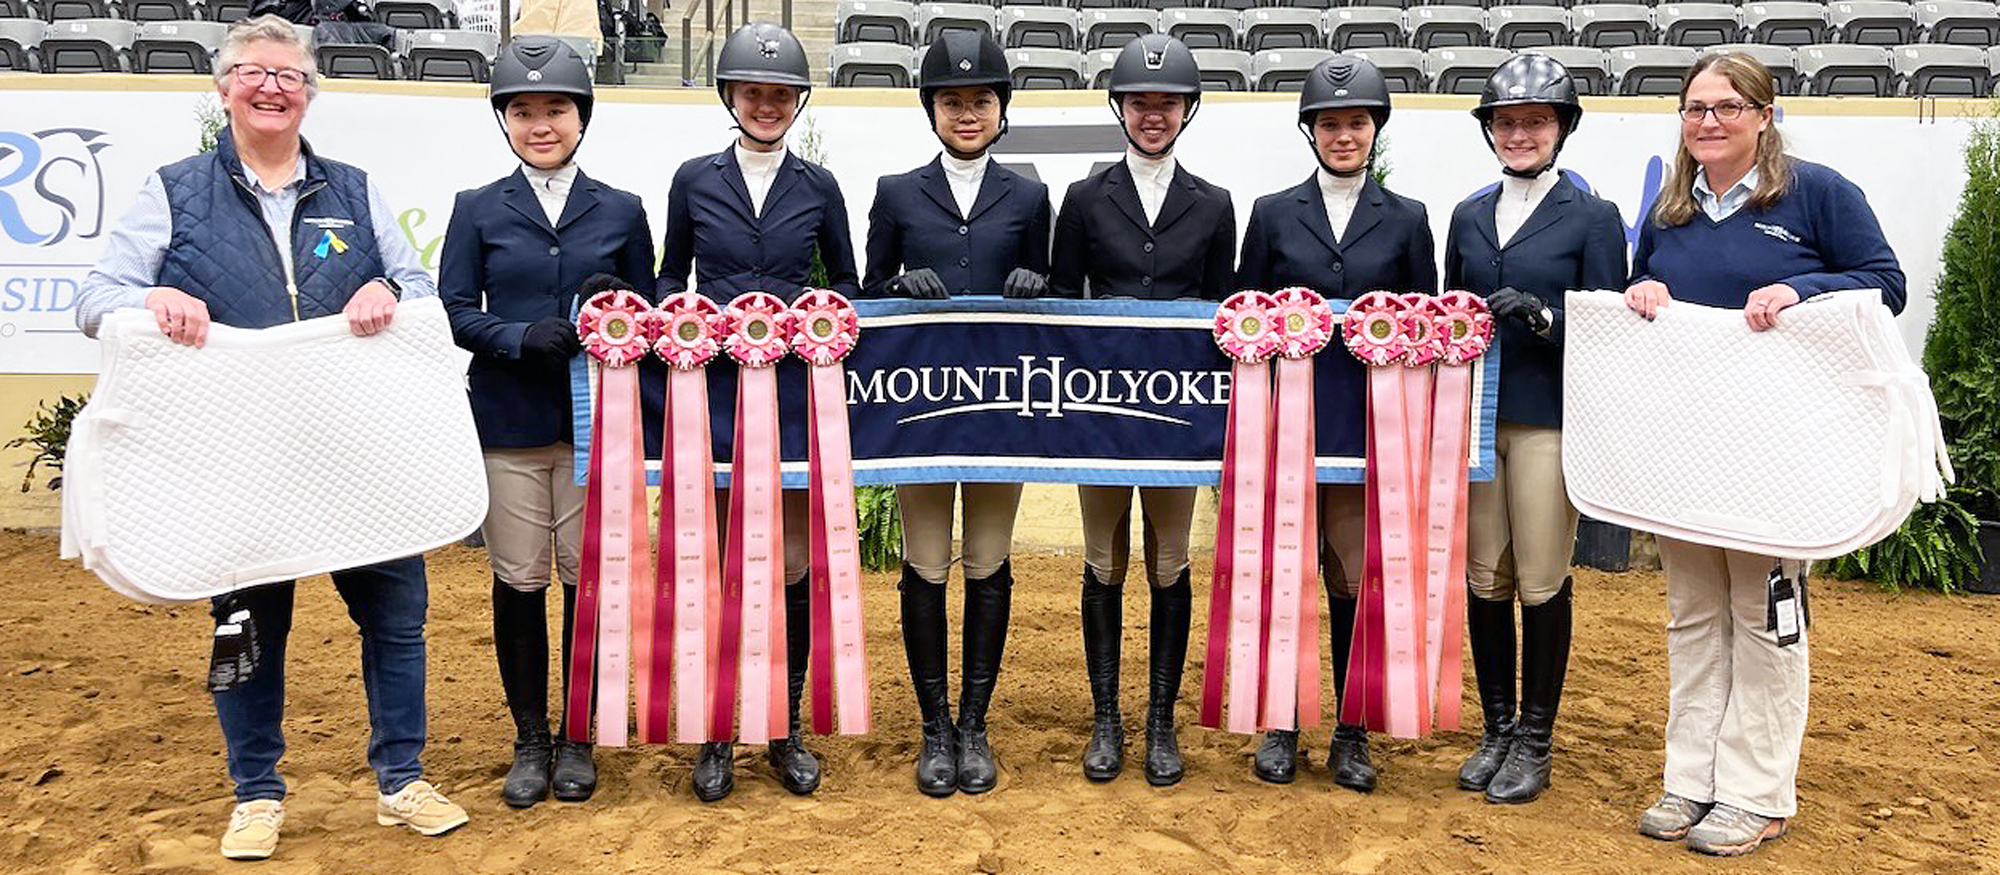 Posing after their fifth-place national finish from the Mount Holyoke hunter seat riding team, from left to right: head coach CJ Law, Lingdang Zhang, Helena Weiss, Kerina Li, Emmie Mirarchi, Em Cantalupo, Cate Bates, and assistant coach Morgan Lynch.